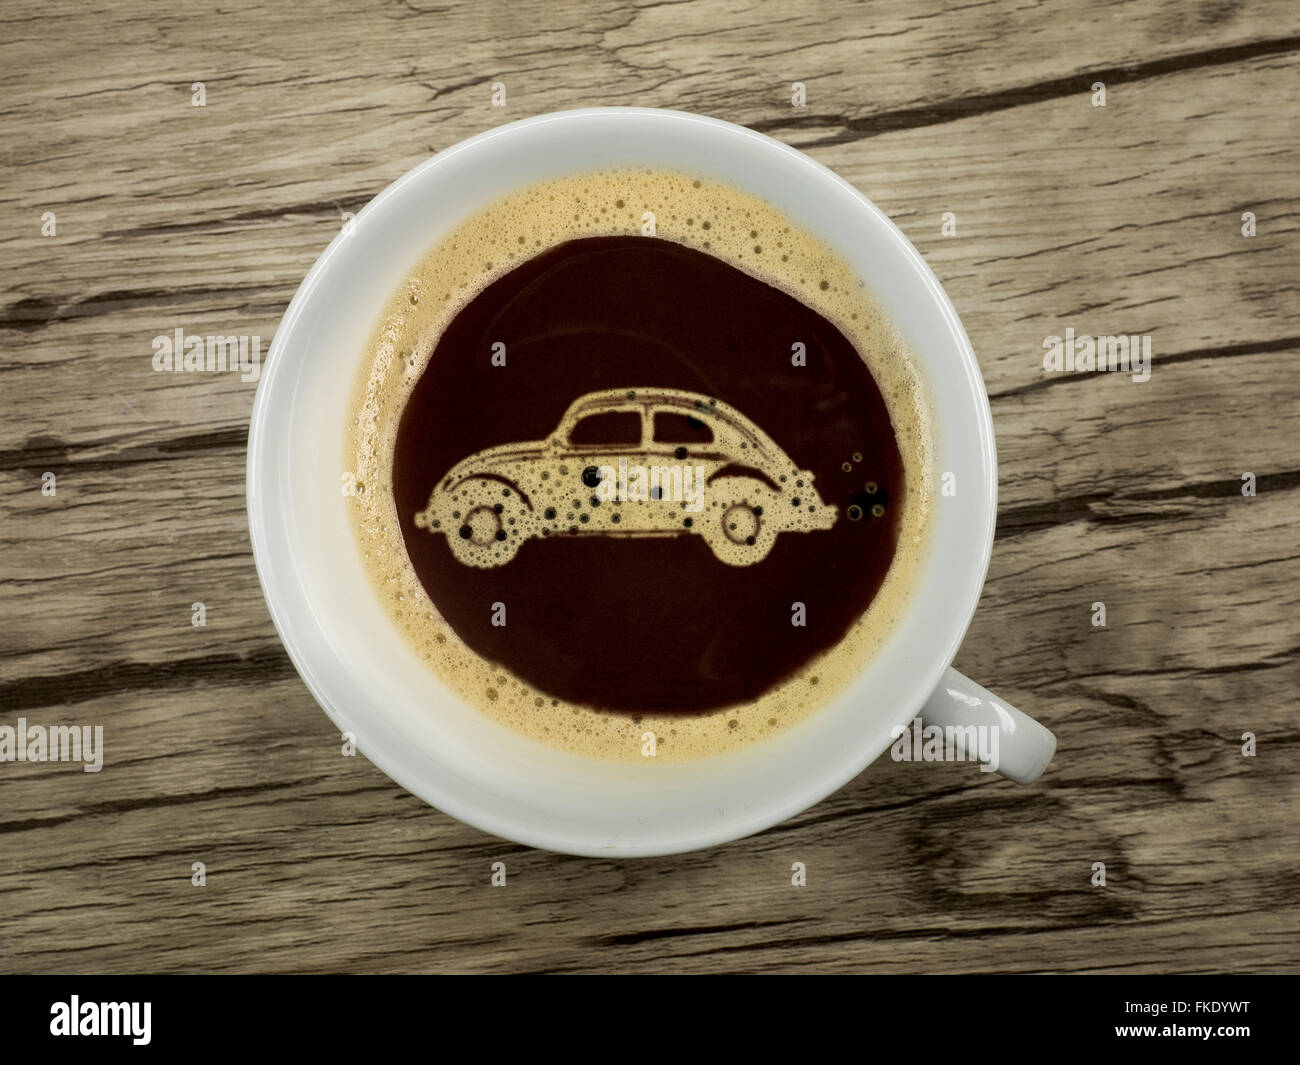 Car repair and coffee service Stock Photo